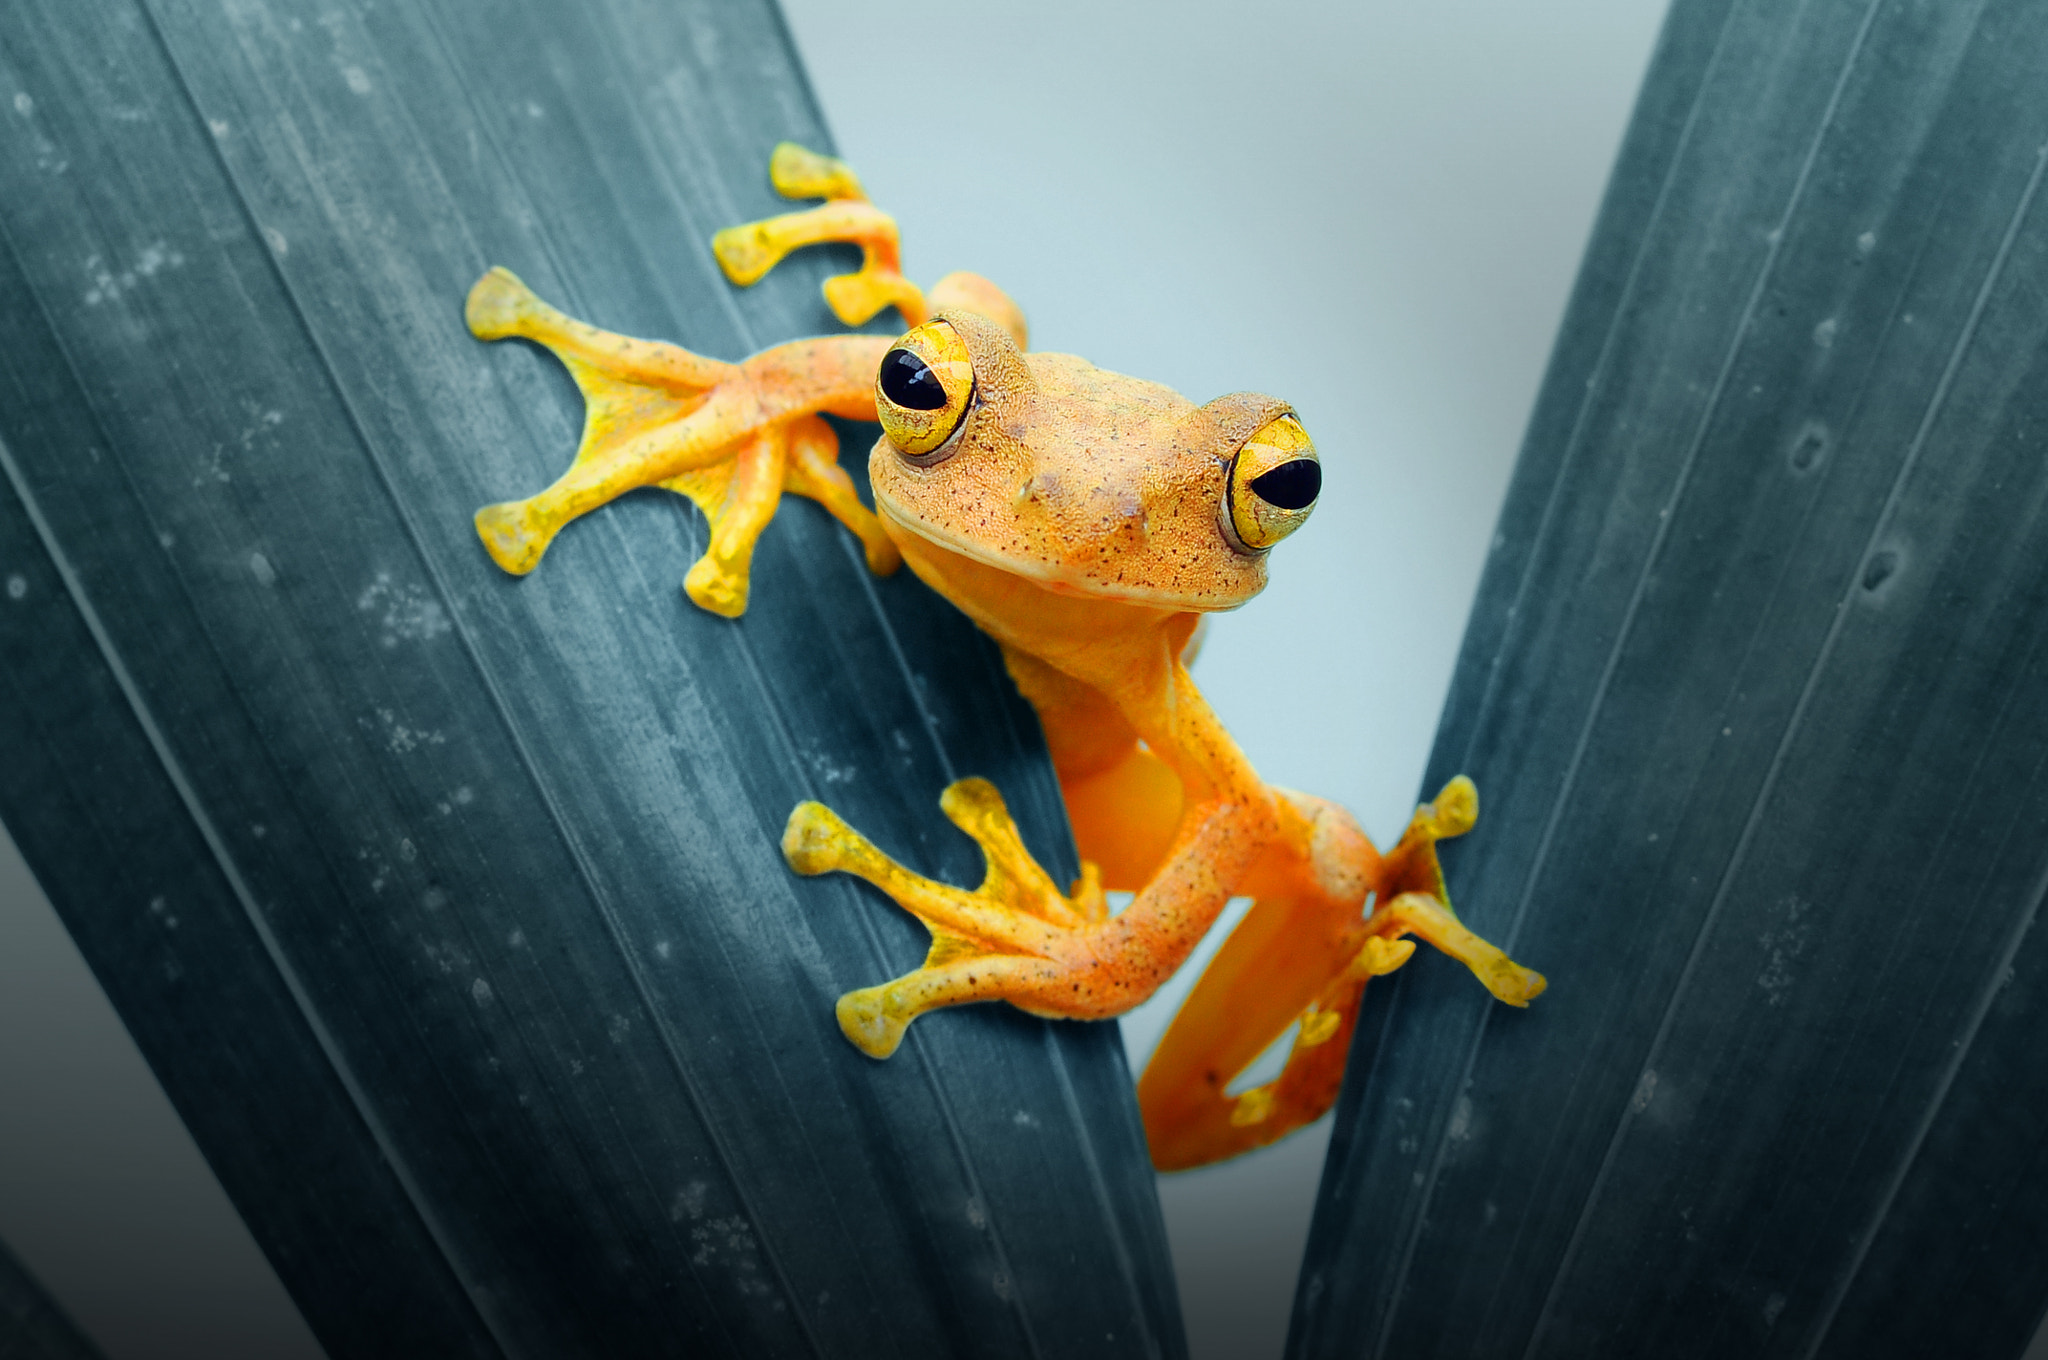 General 2048x1360 animals frog leaves plants closeup nature